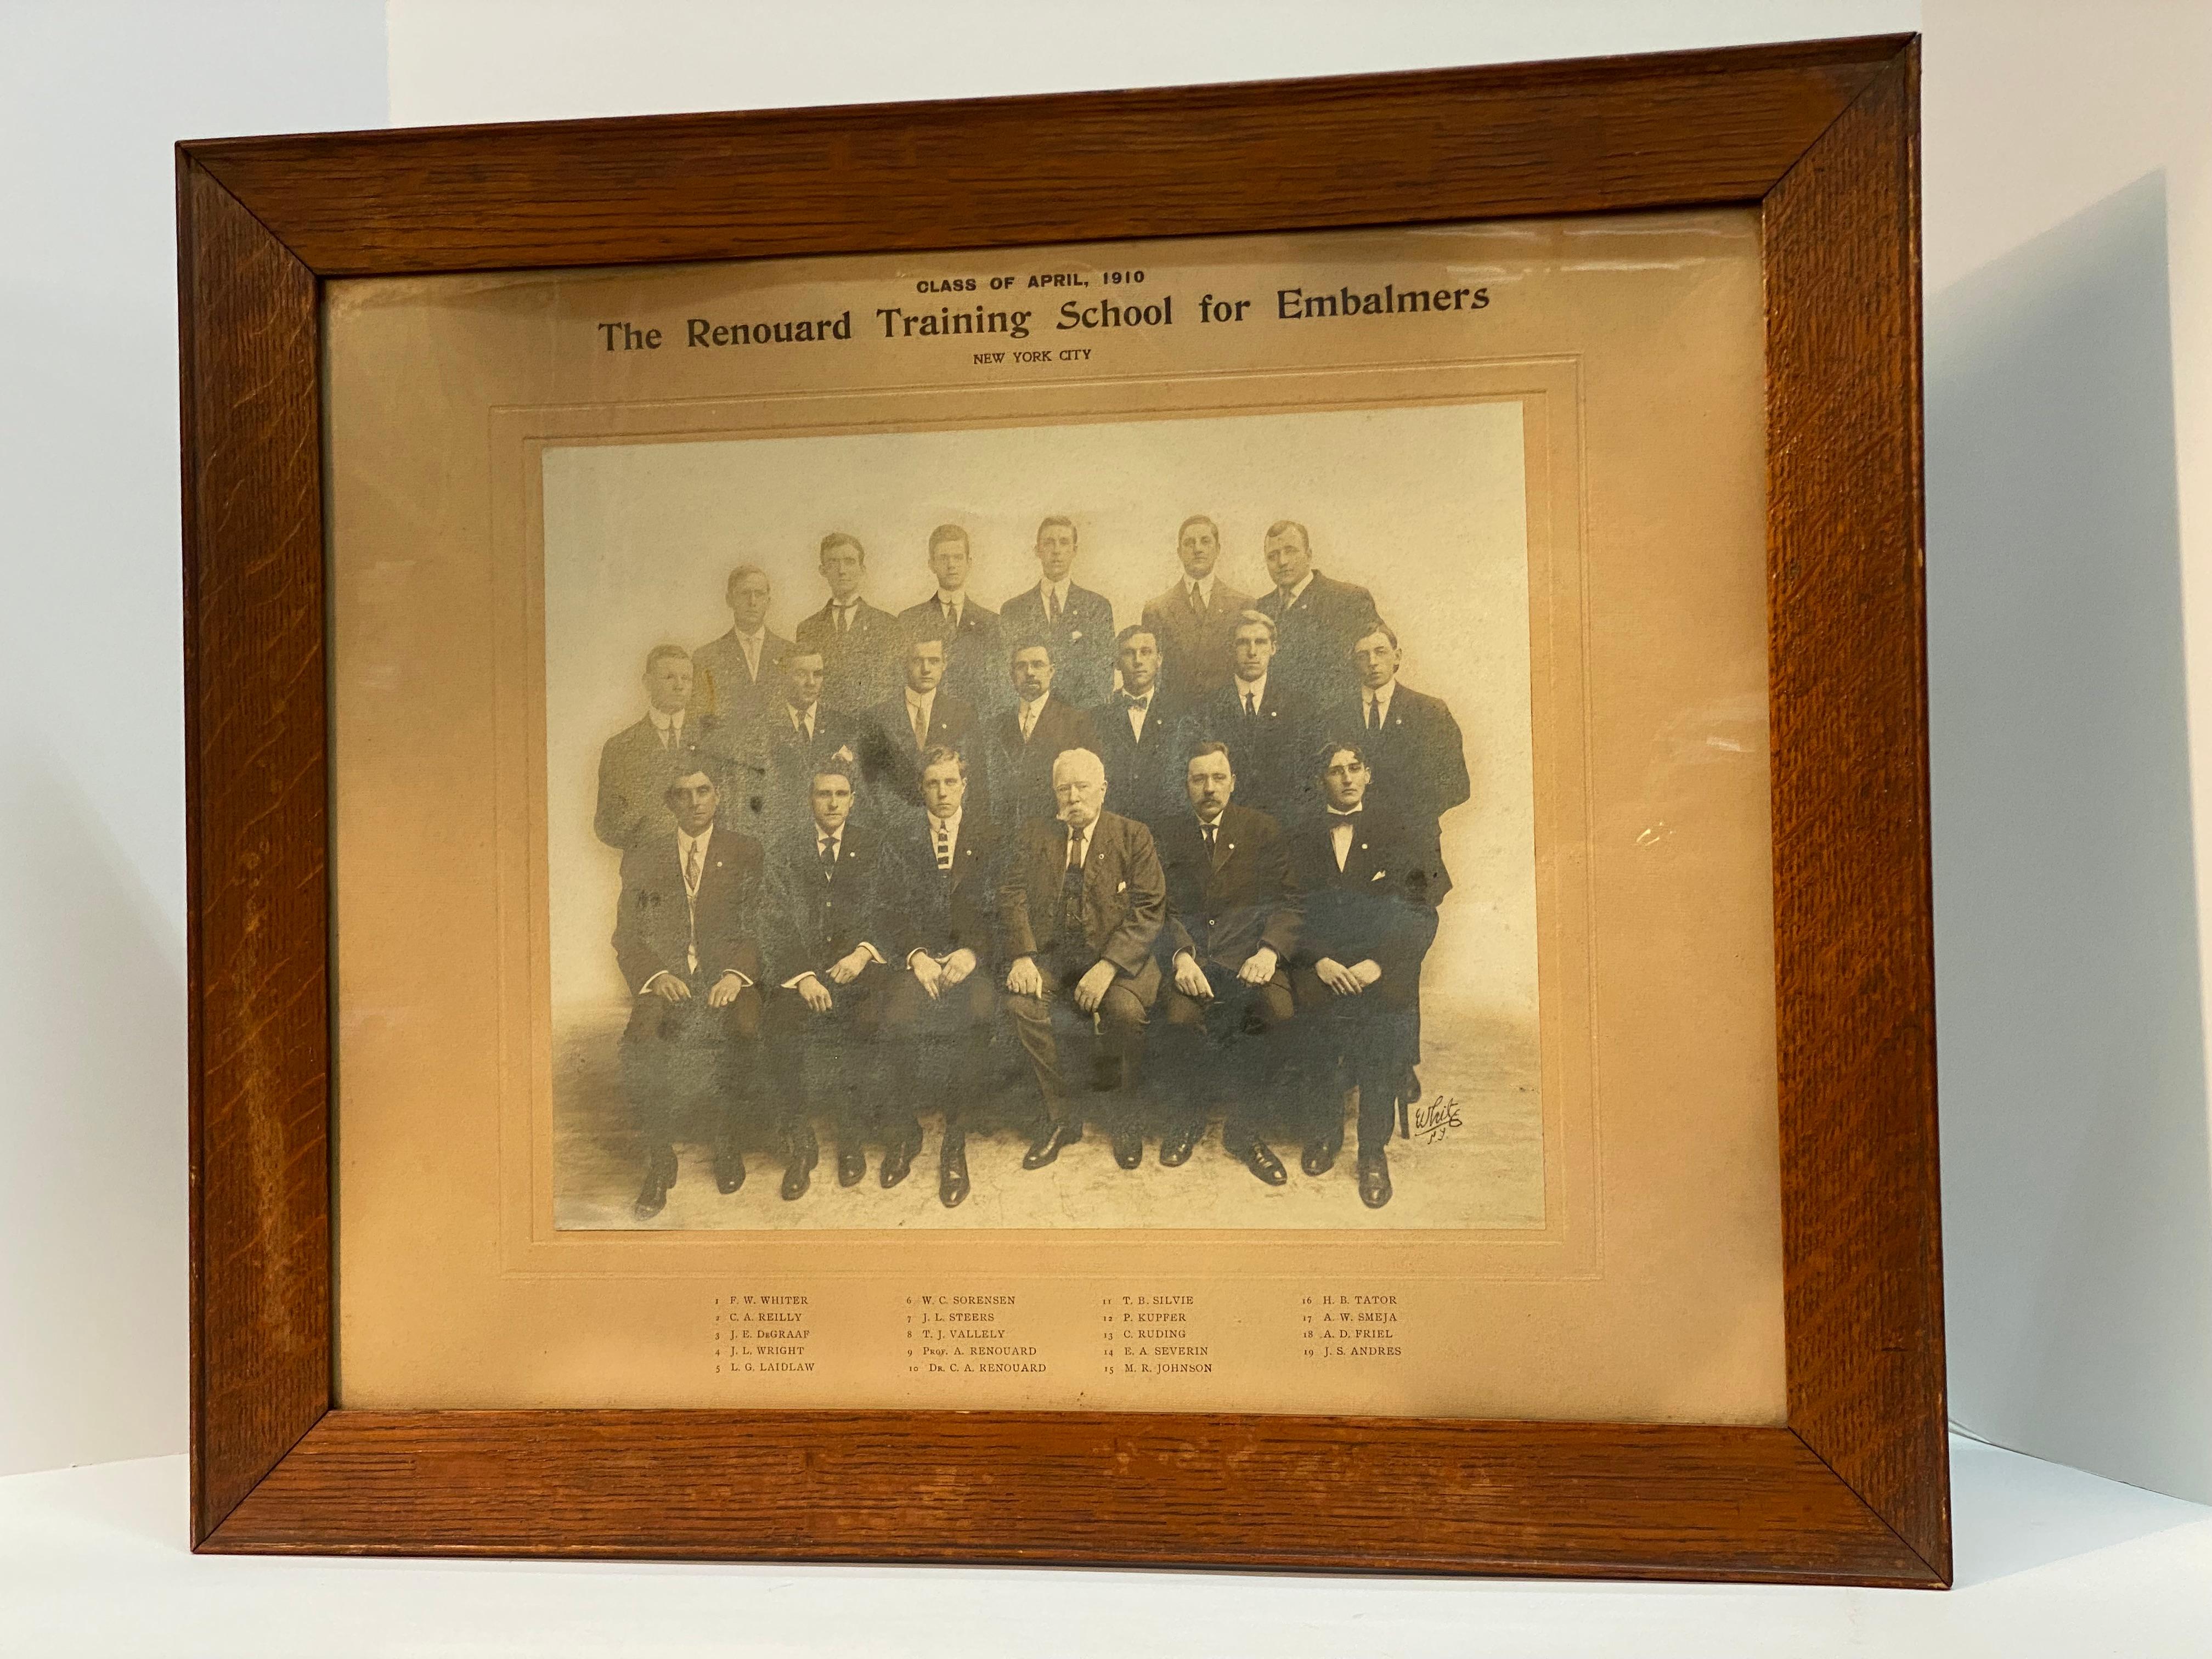 American 1910 Renouard Training School for Embalmers New York City Graduating Class Photo For Sale